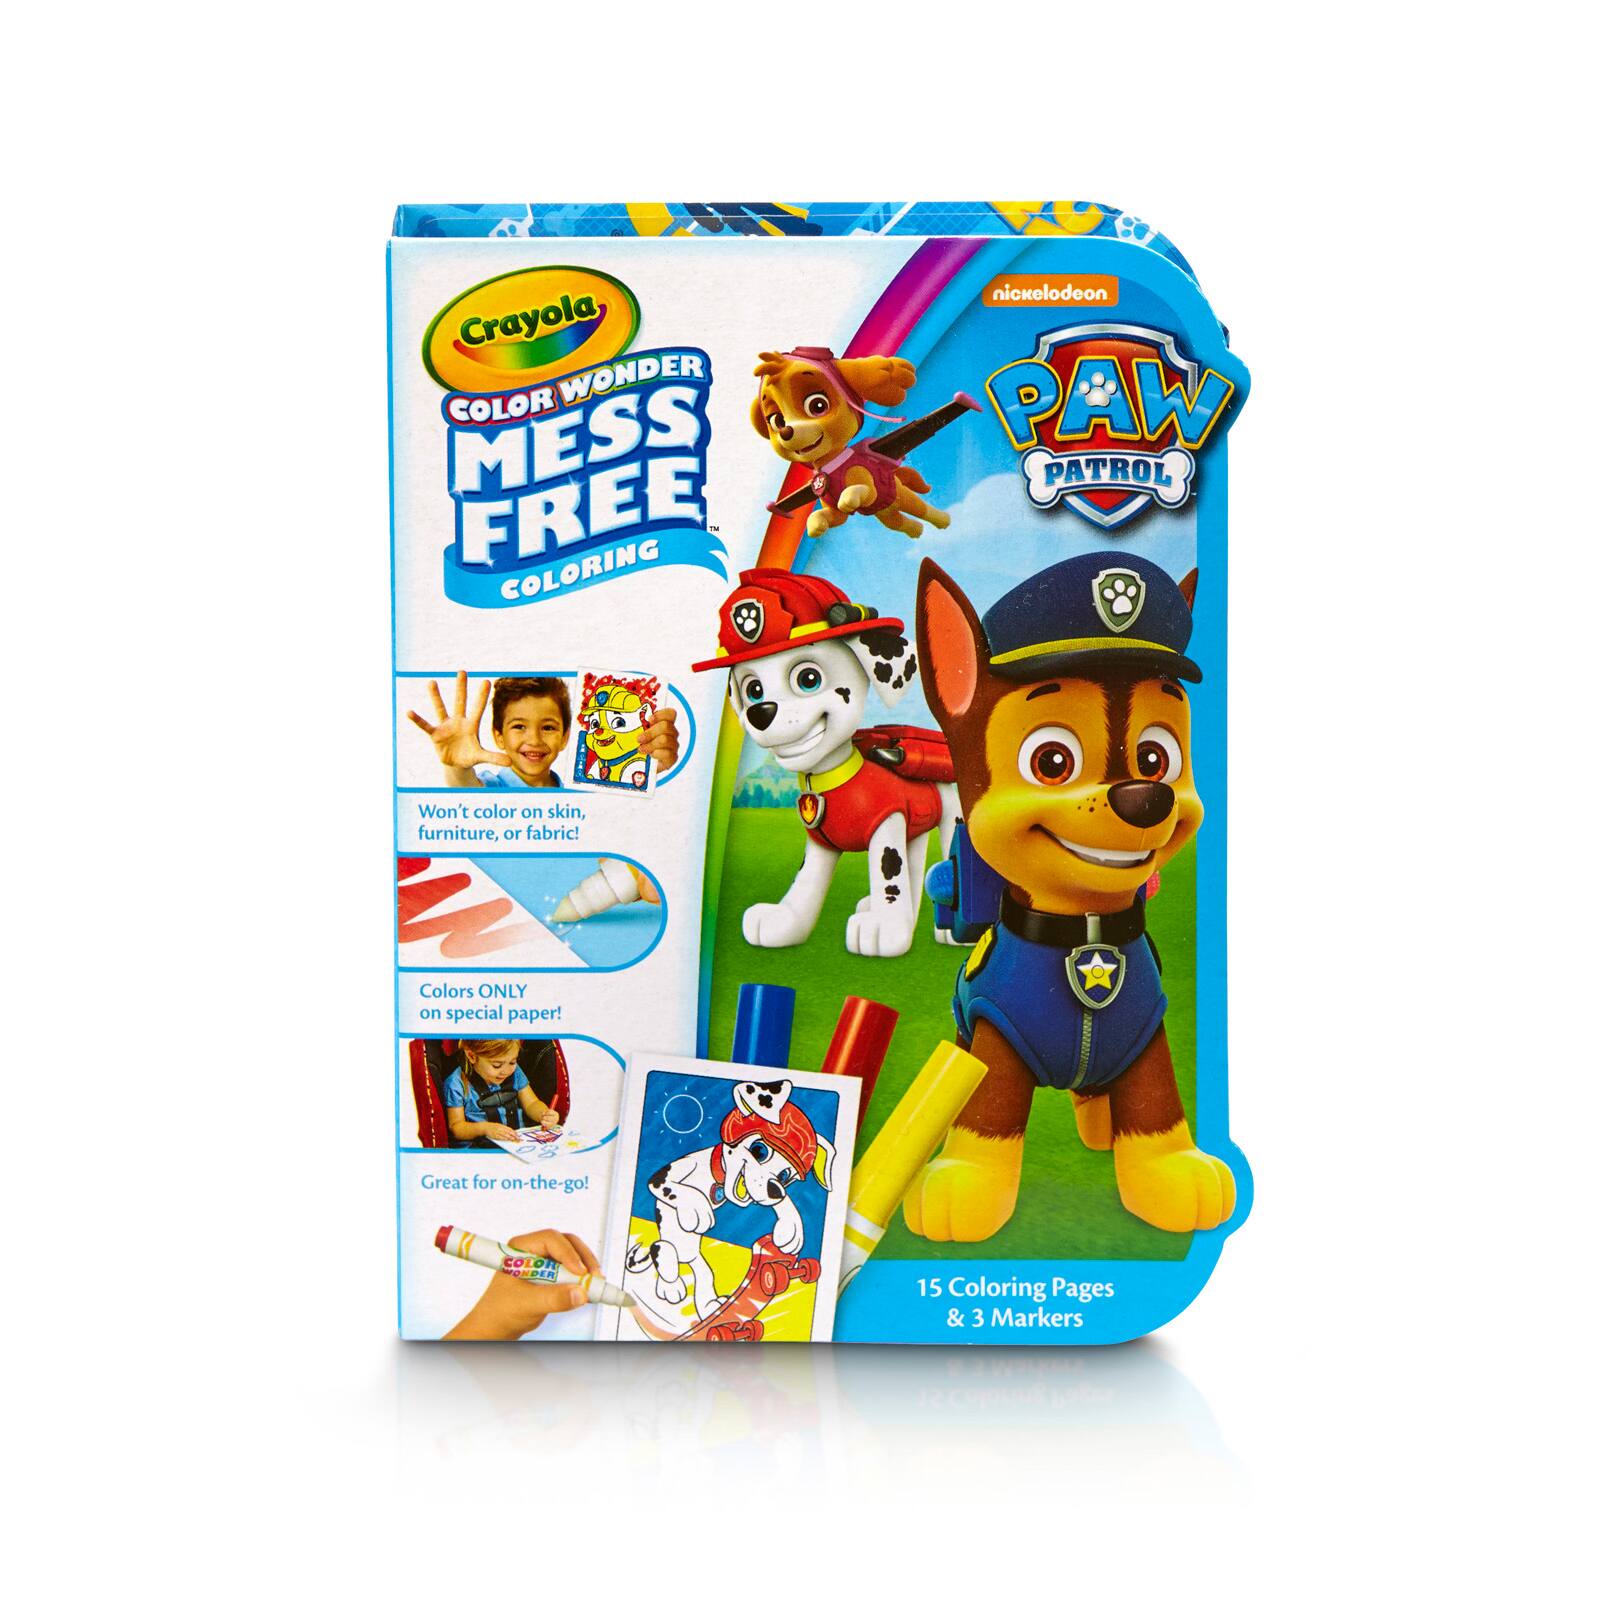 Download Find the Crayola® Color Wonder™ On the Go Kit, PAW Patrol™ at Michaels